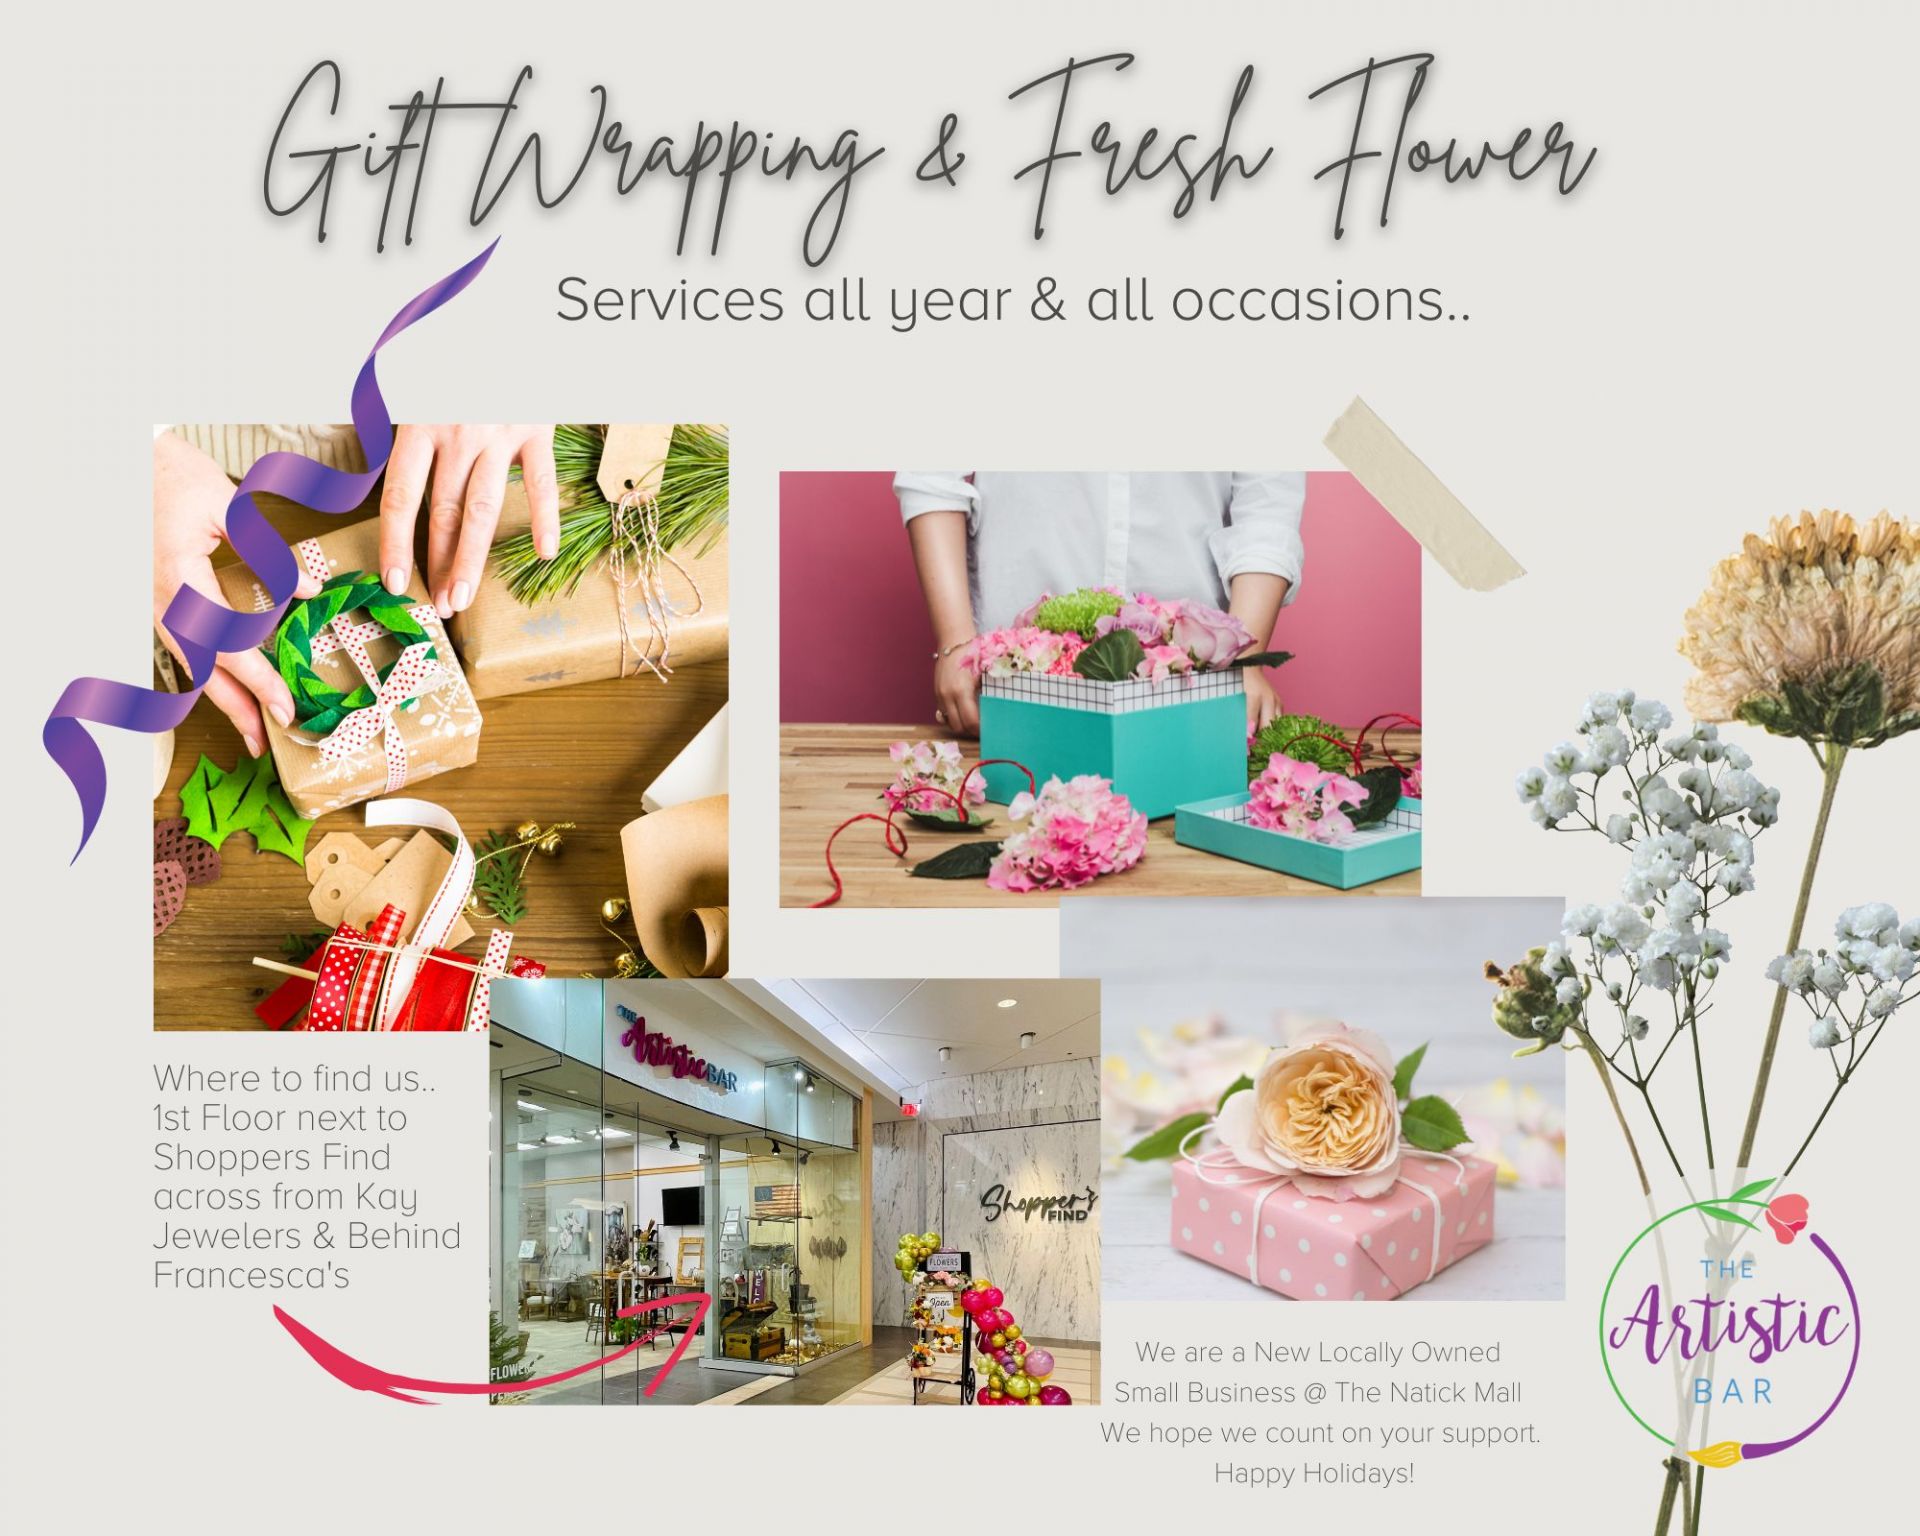 Gifts Wrapping & Fresh Flowers Services